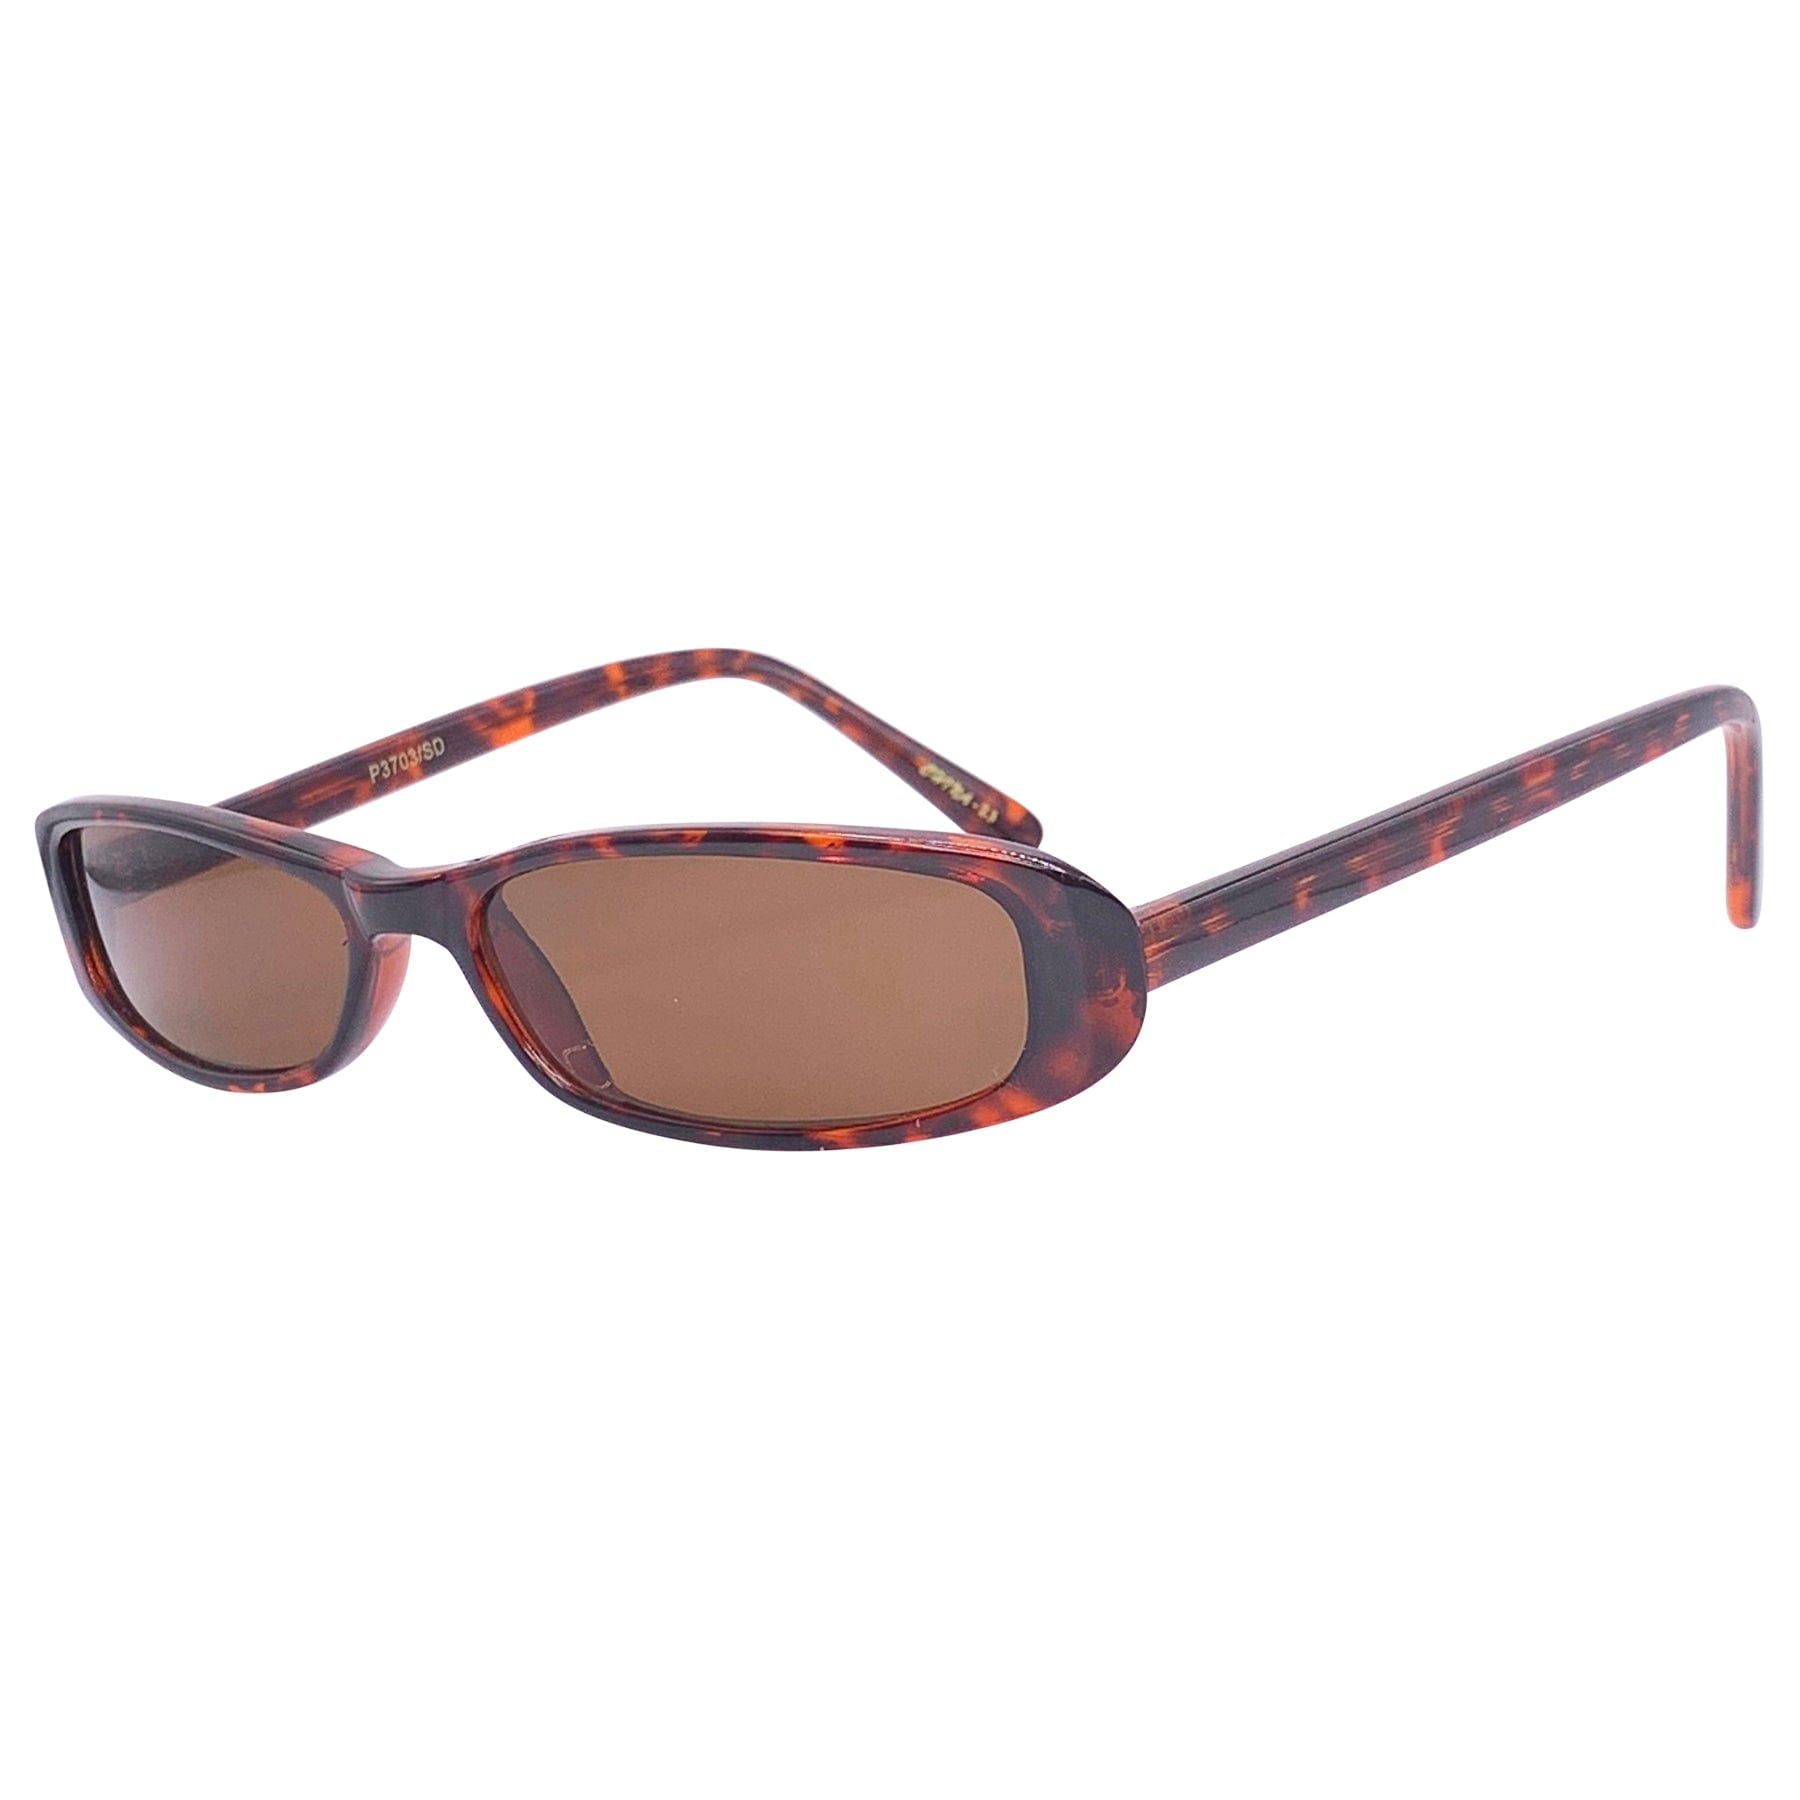 tortoise colored sunglasses with a brown lens and 90s style frame